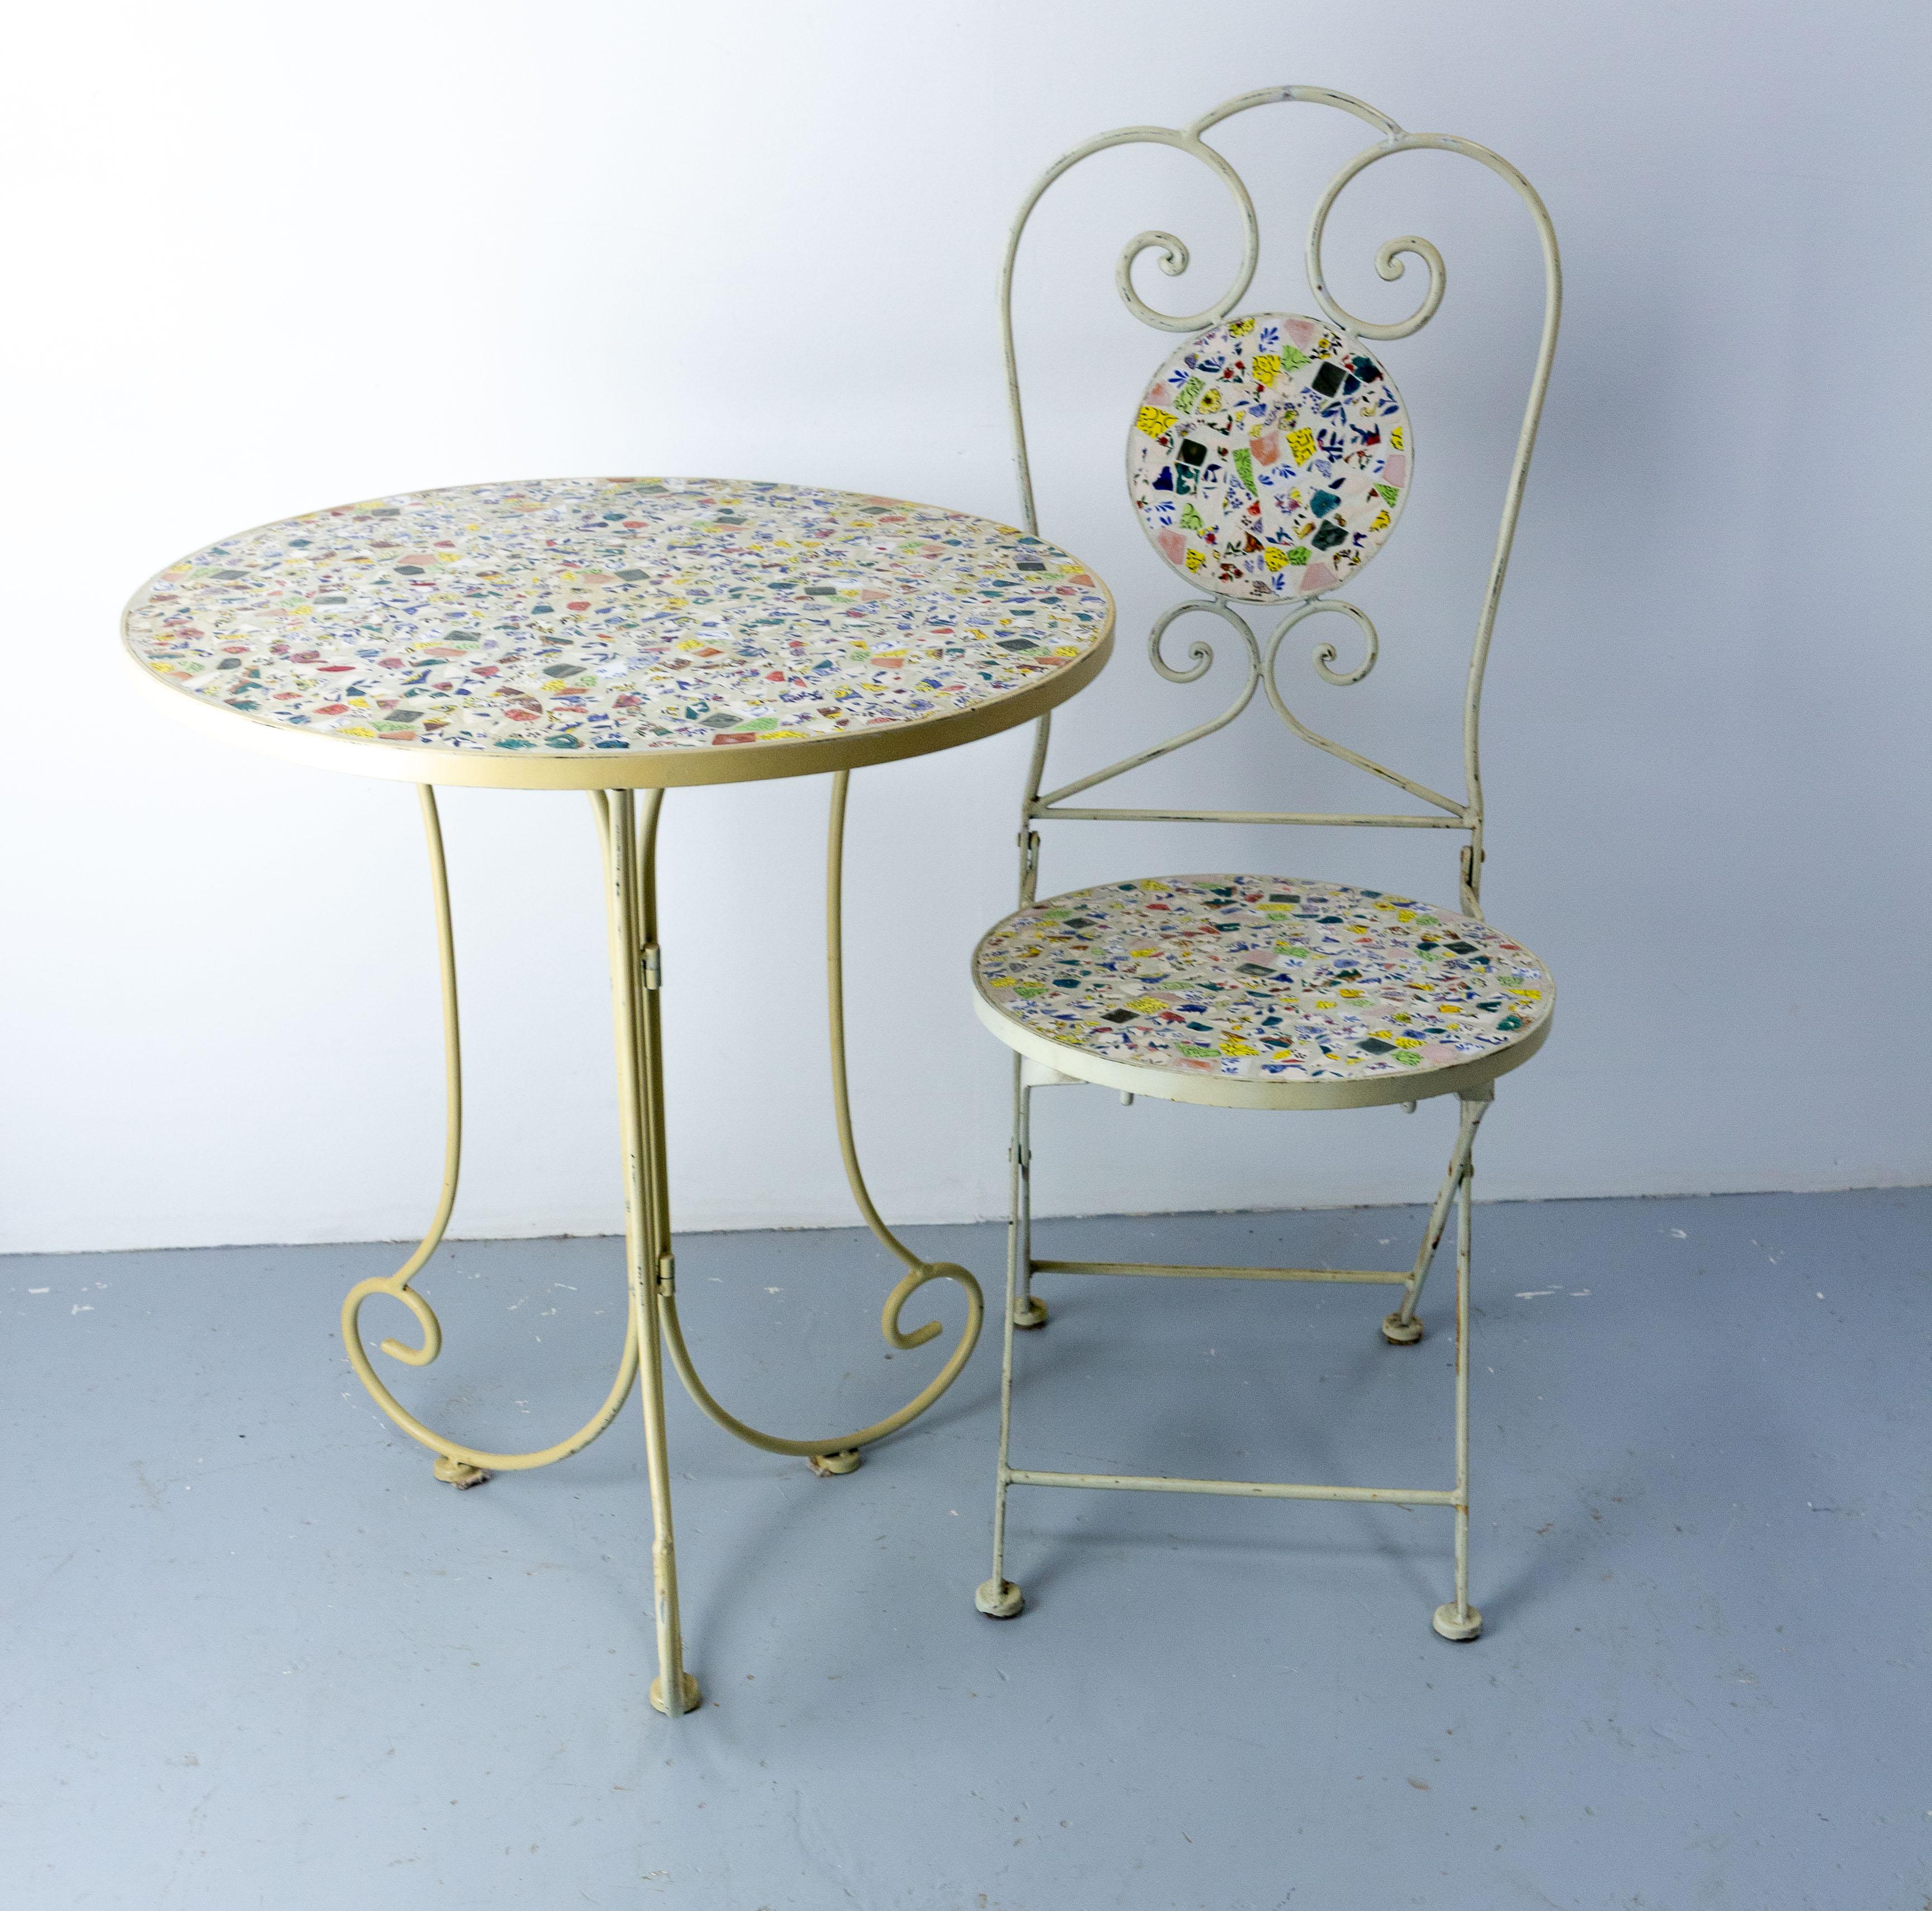 French folding iron chair and table, decorated with colored faience in concrete
Good condition with authenticate patina.
Each piece is fold-able.
Dimension: 
chair: D 19.68 in. W 15.35 in. H 38.19 in. Seat H 18.50 in. ( D 50, W 39, H 97, H seat